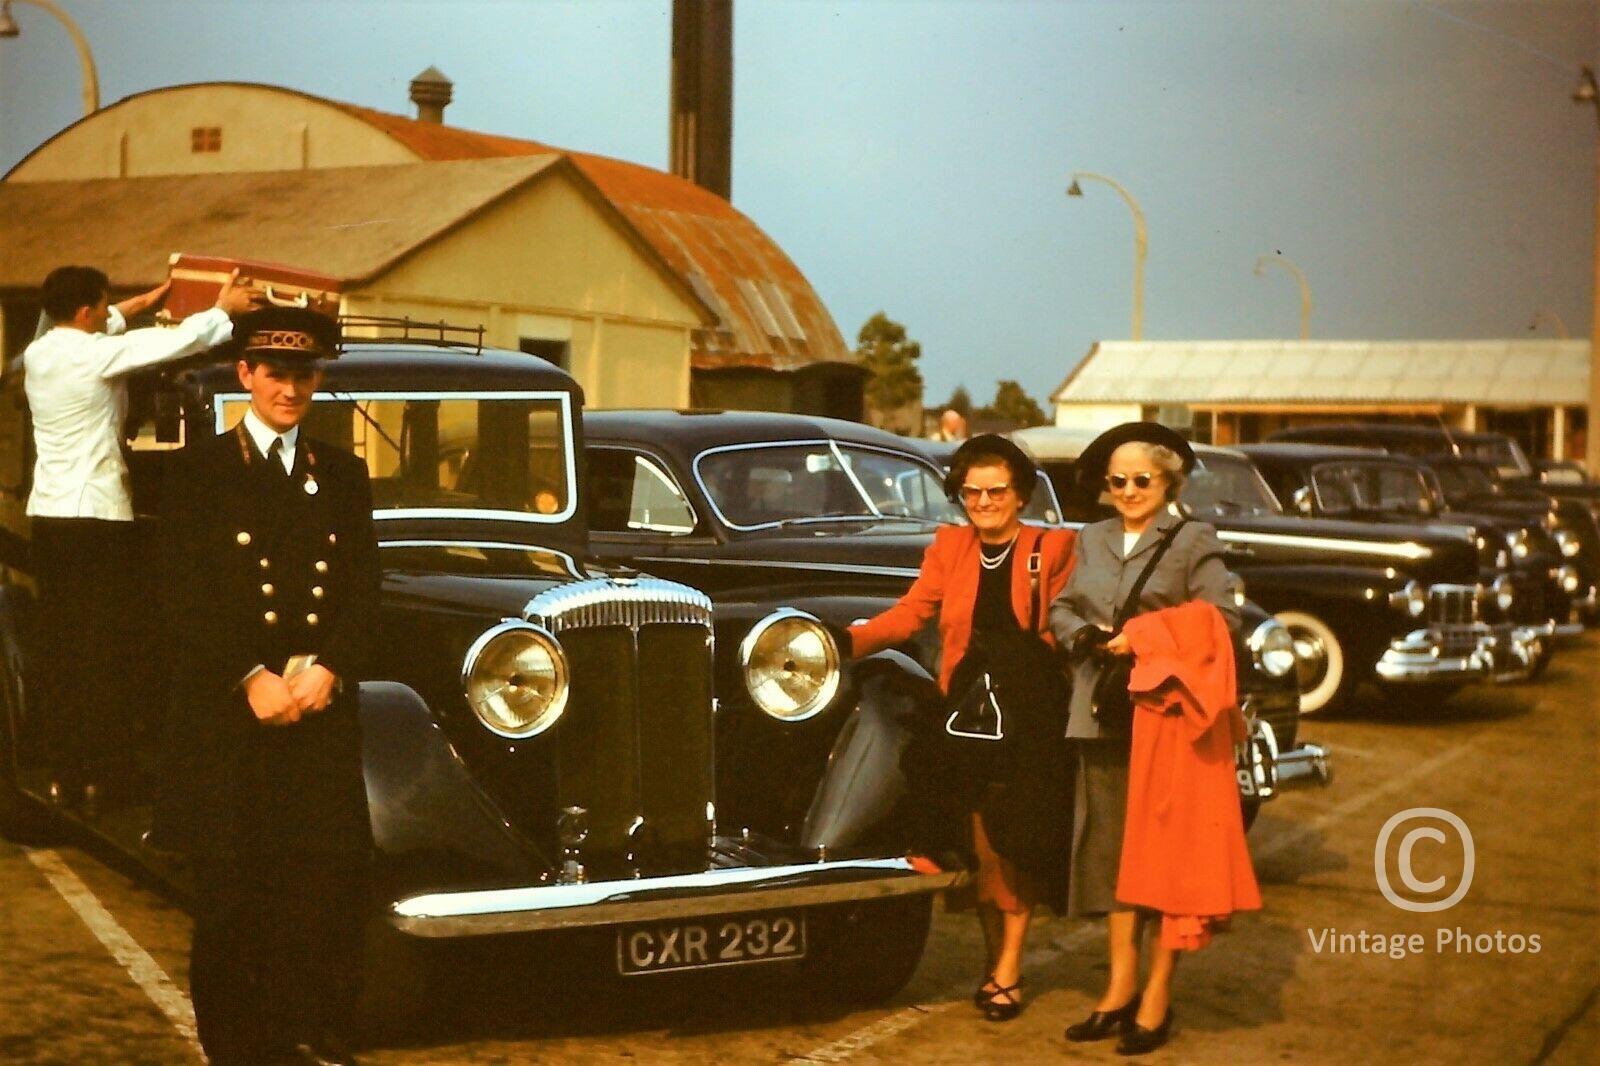 1950s Old Classic Daimler Car and 2 Ladies